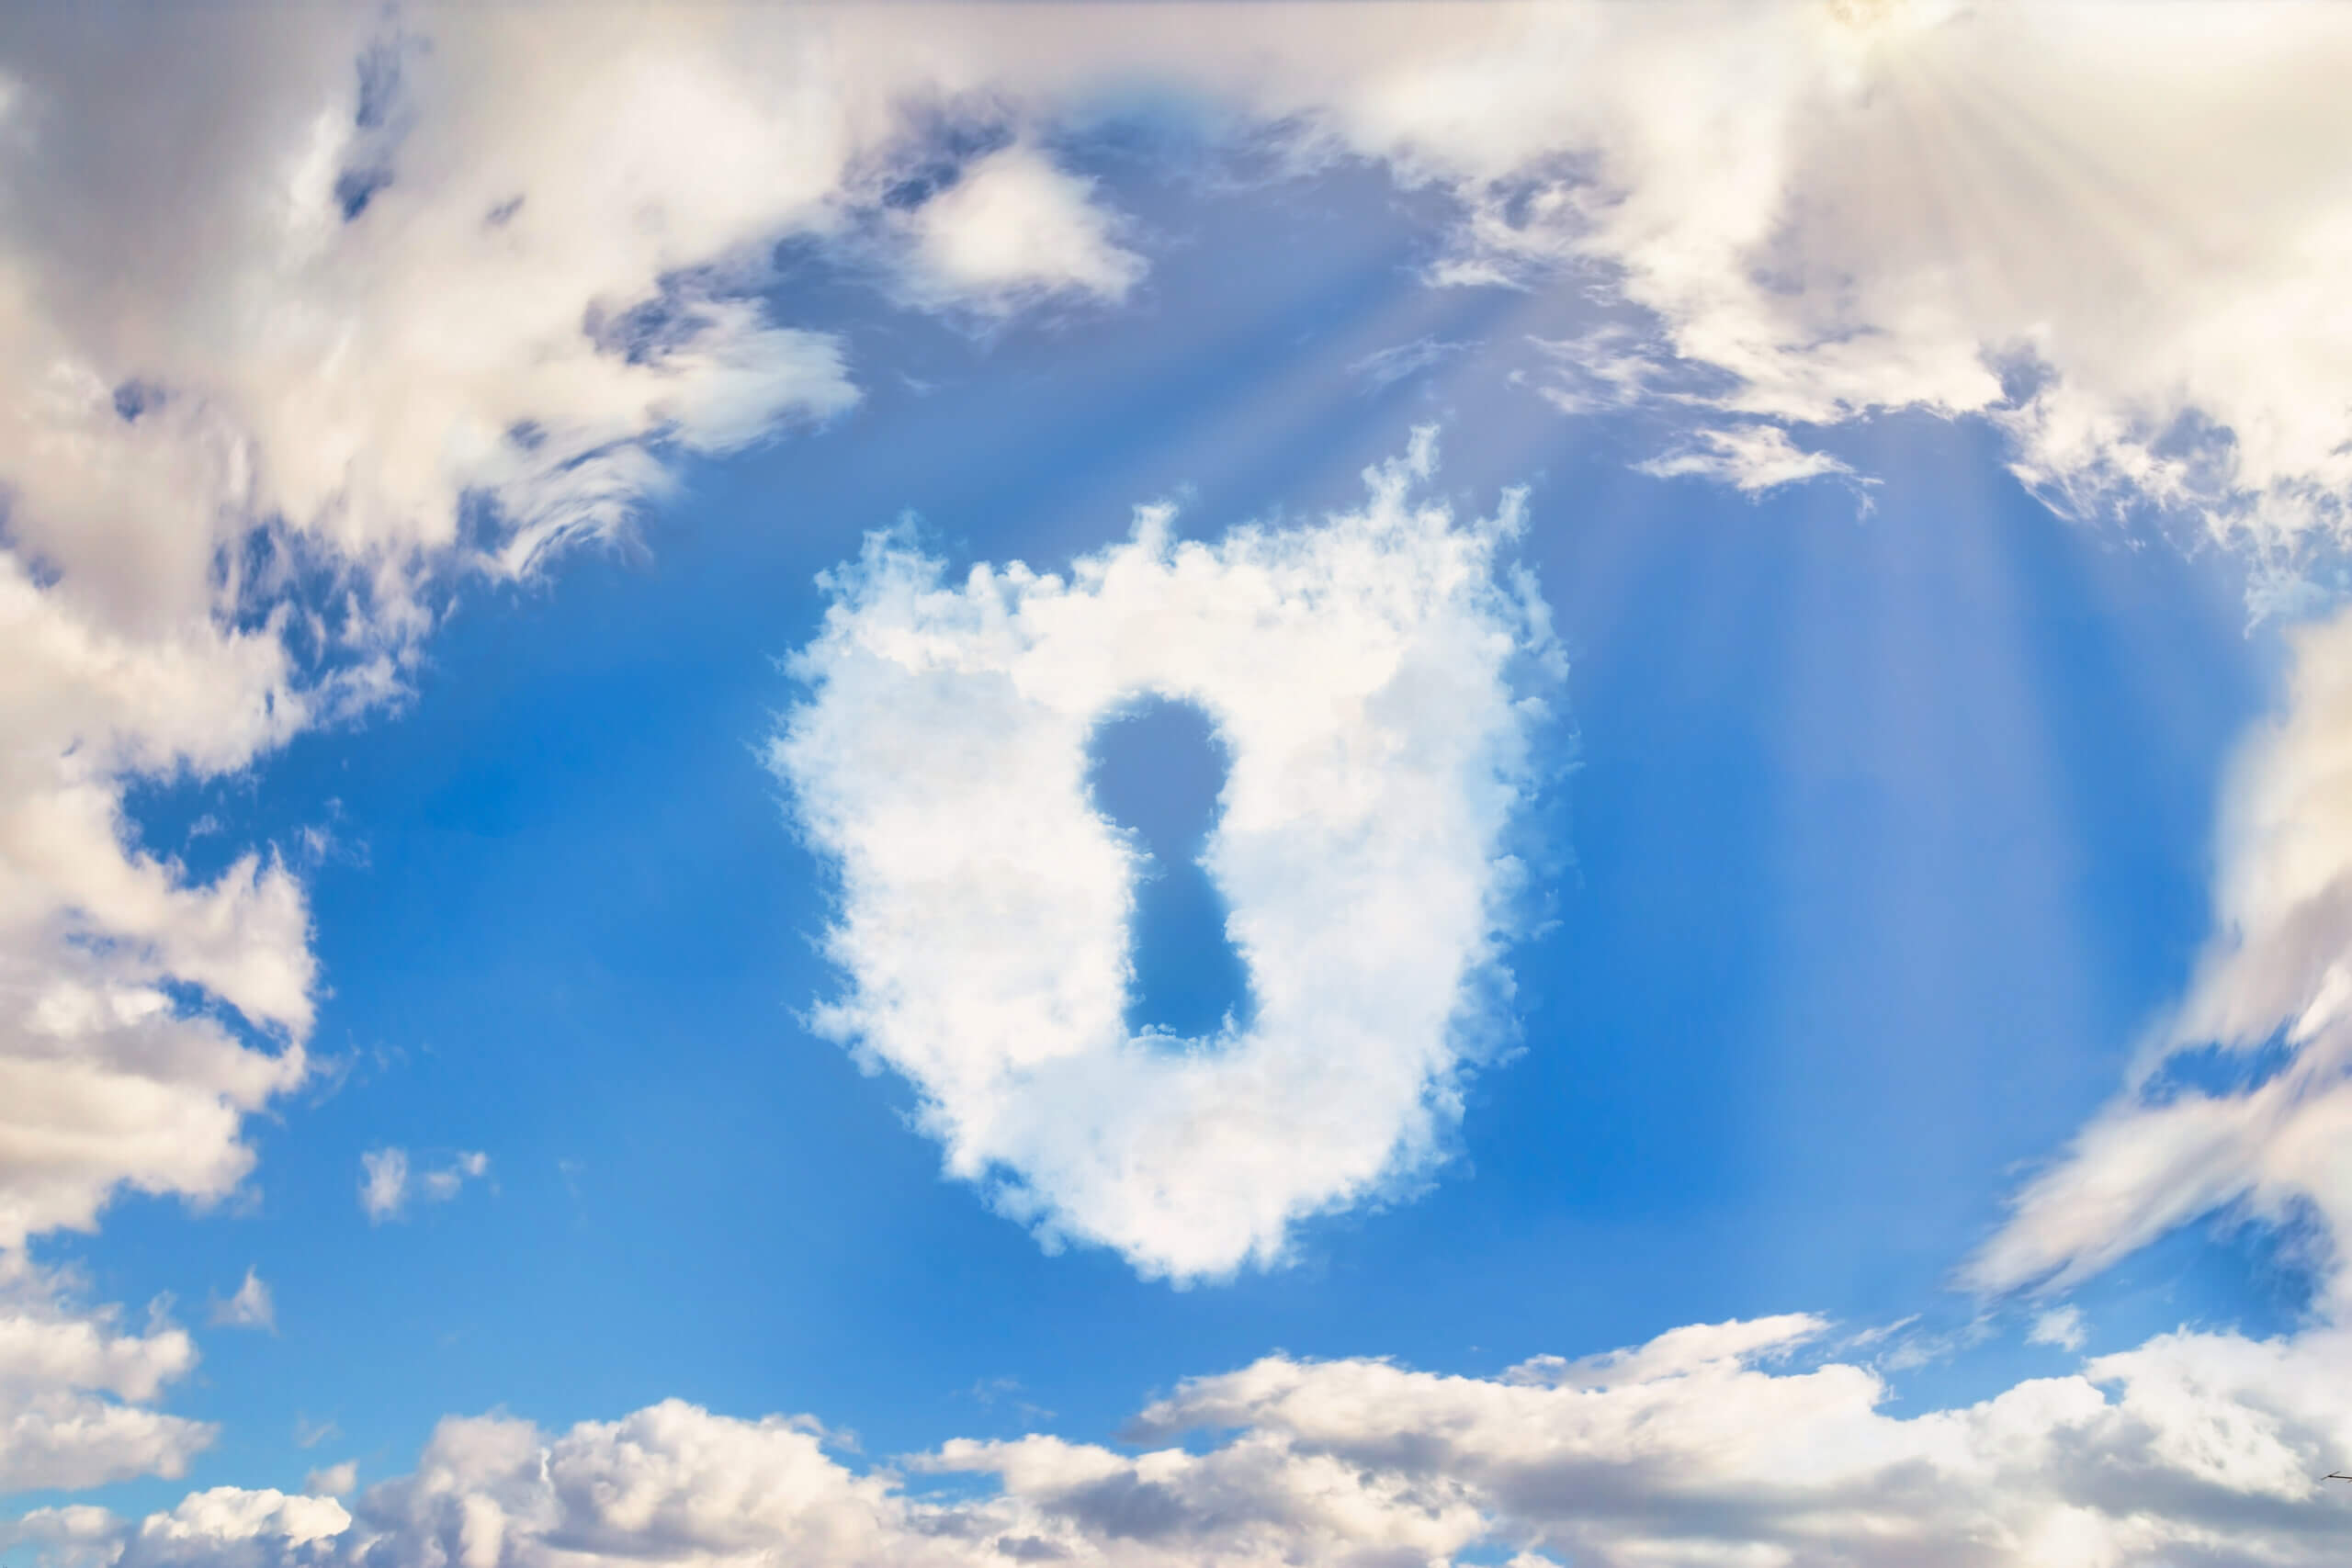 Why You Should Adopt a Cloud-Based Security System